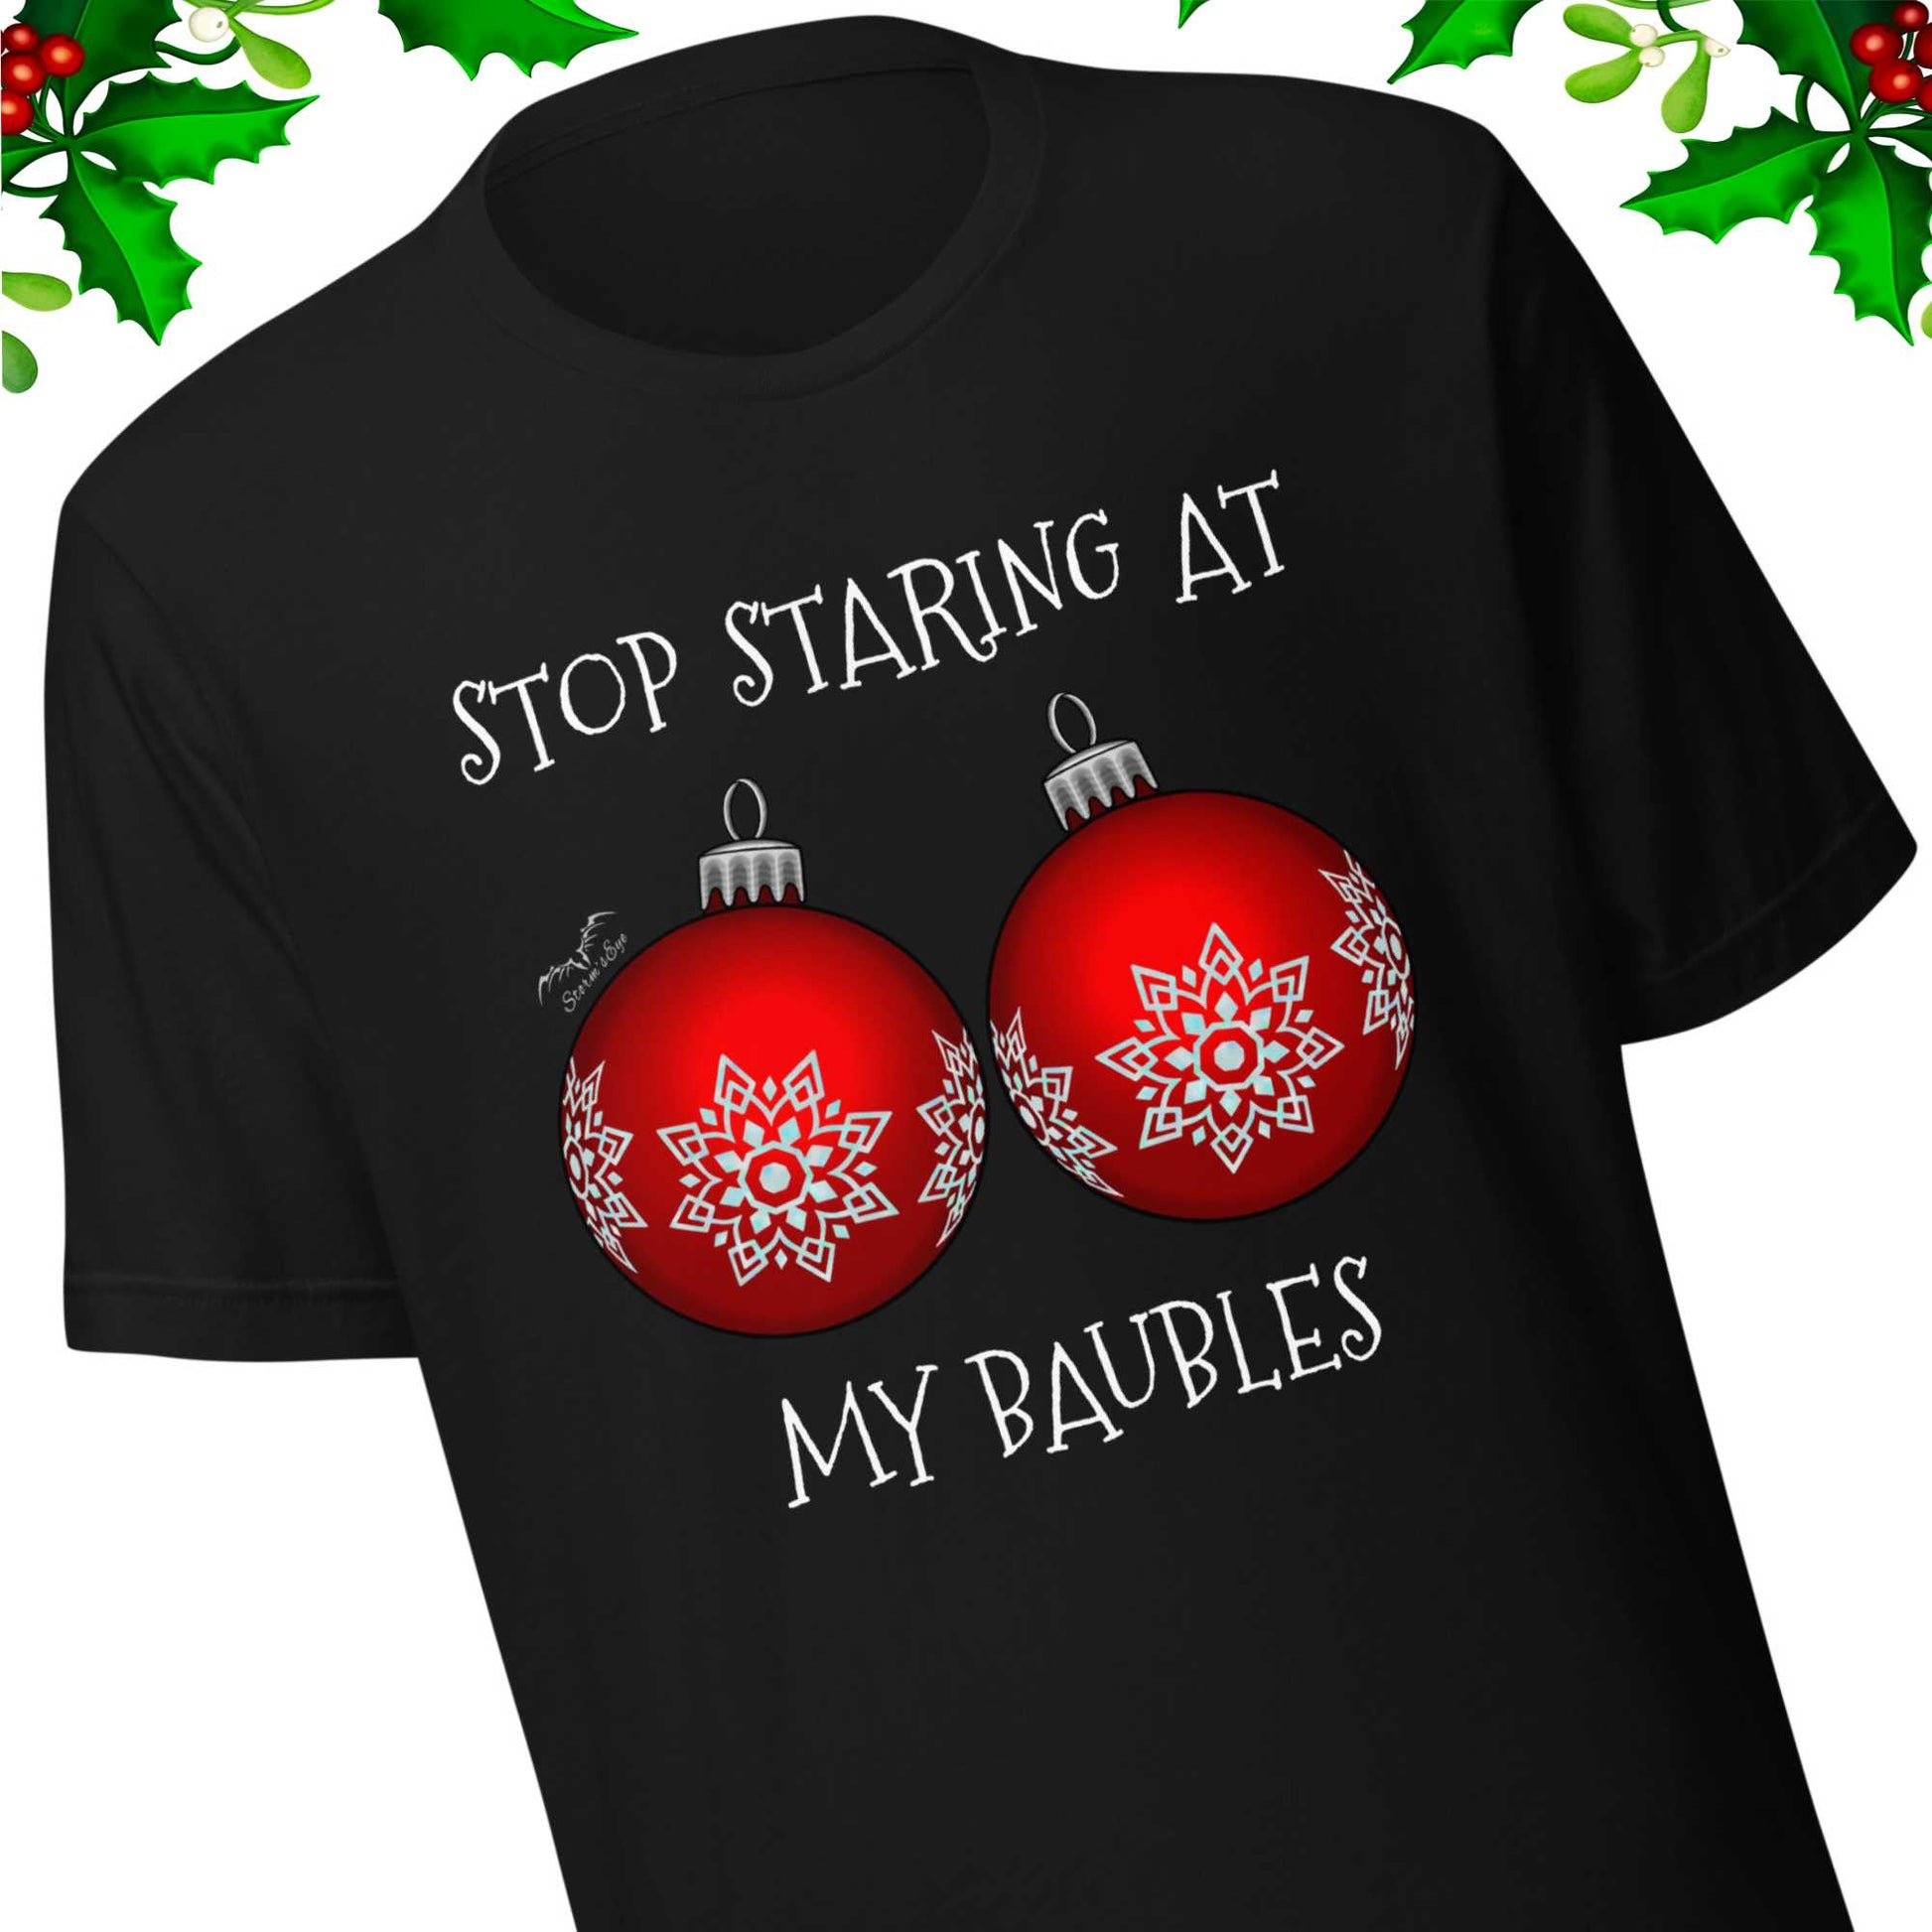 stormseye design stop staring baubles christmas T shirt, detail view black